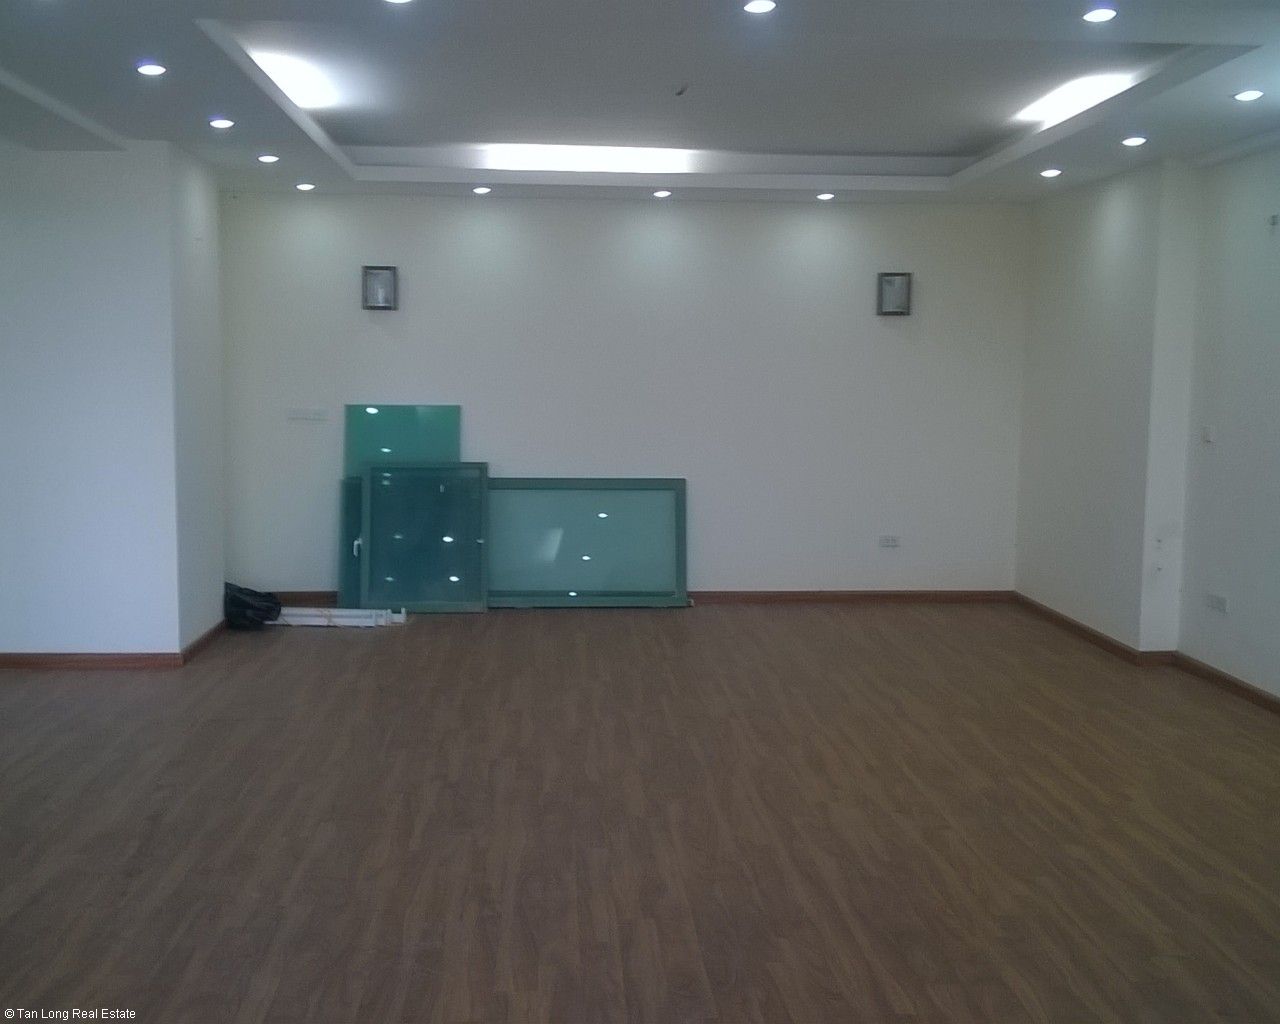 Non-equipped penthouse for rent in Skylight building, Hai Ba Trung district, Hanoi 6